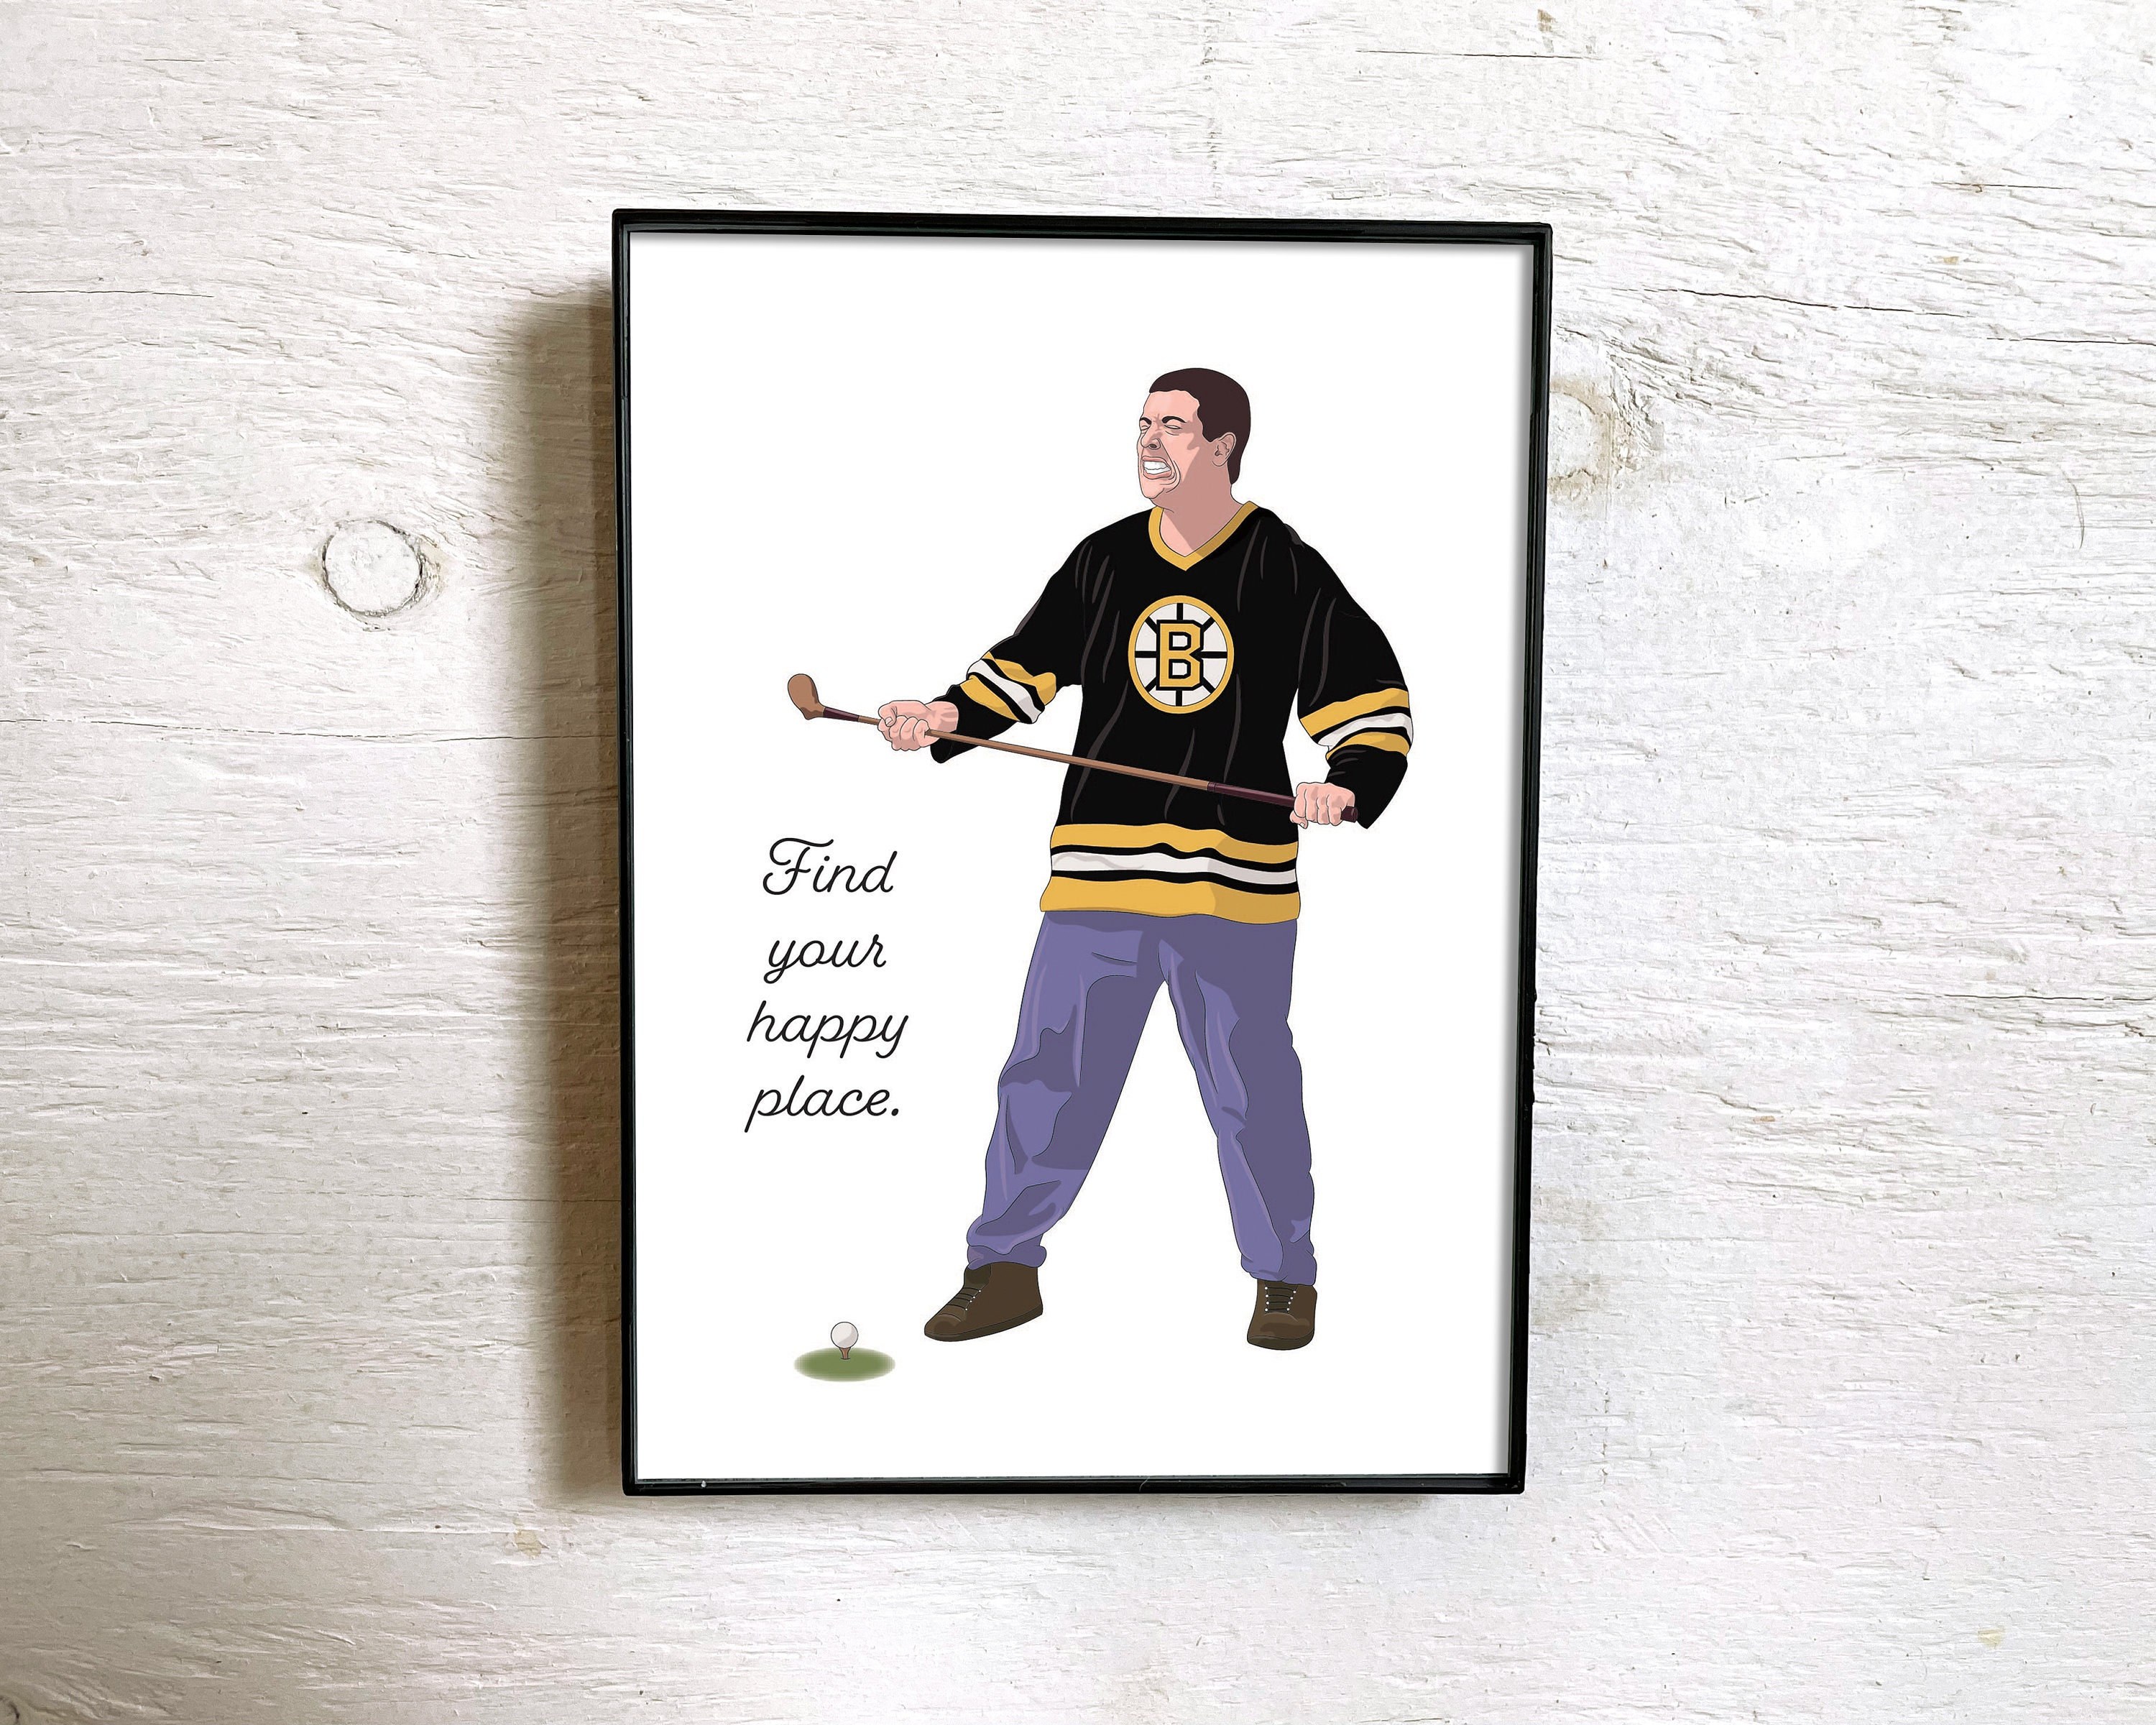 Happy Gilmore 18 Jersey Ice Hockey Jersey Embroidery Stitched Mens S Xxxl  90s Hip Hop Clothing For Party - Sports & Outdoors - Temu Netherlands